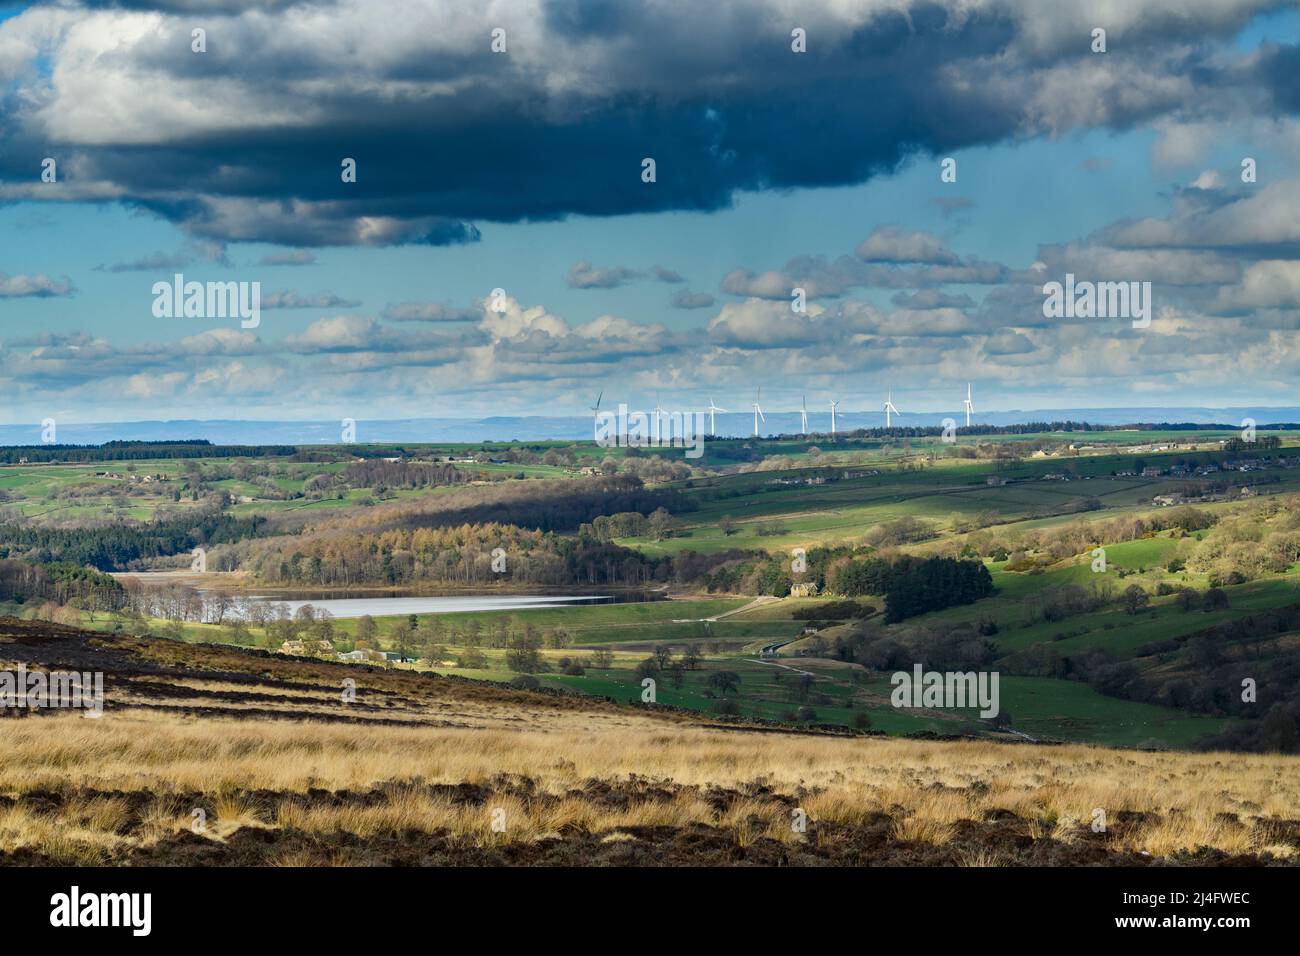 Scenic sunny rural Washburn Valley (Swinsty reservoir, farmland pastures, tall high giant wind turbine towers, cloudy) - North Yorkshire, England UK. Stock Photo